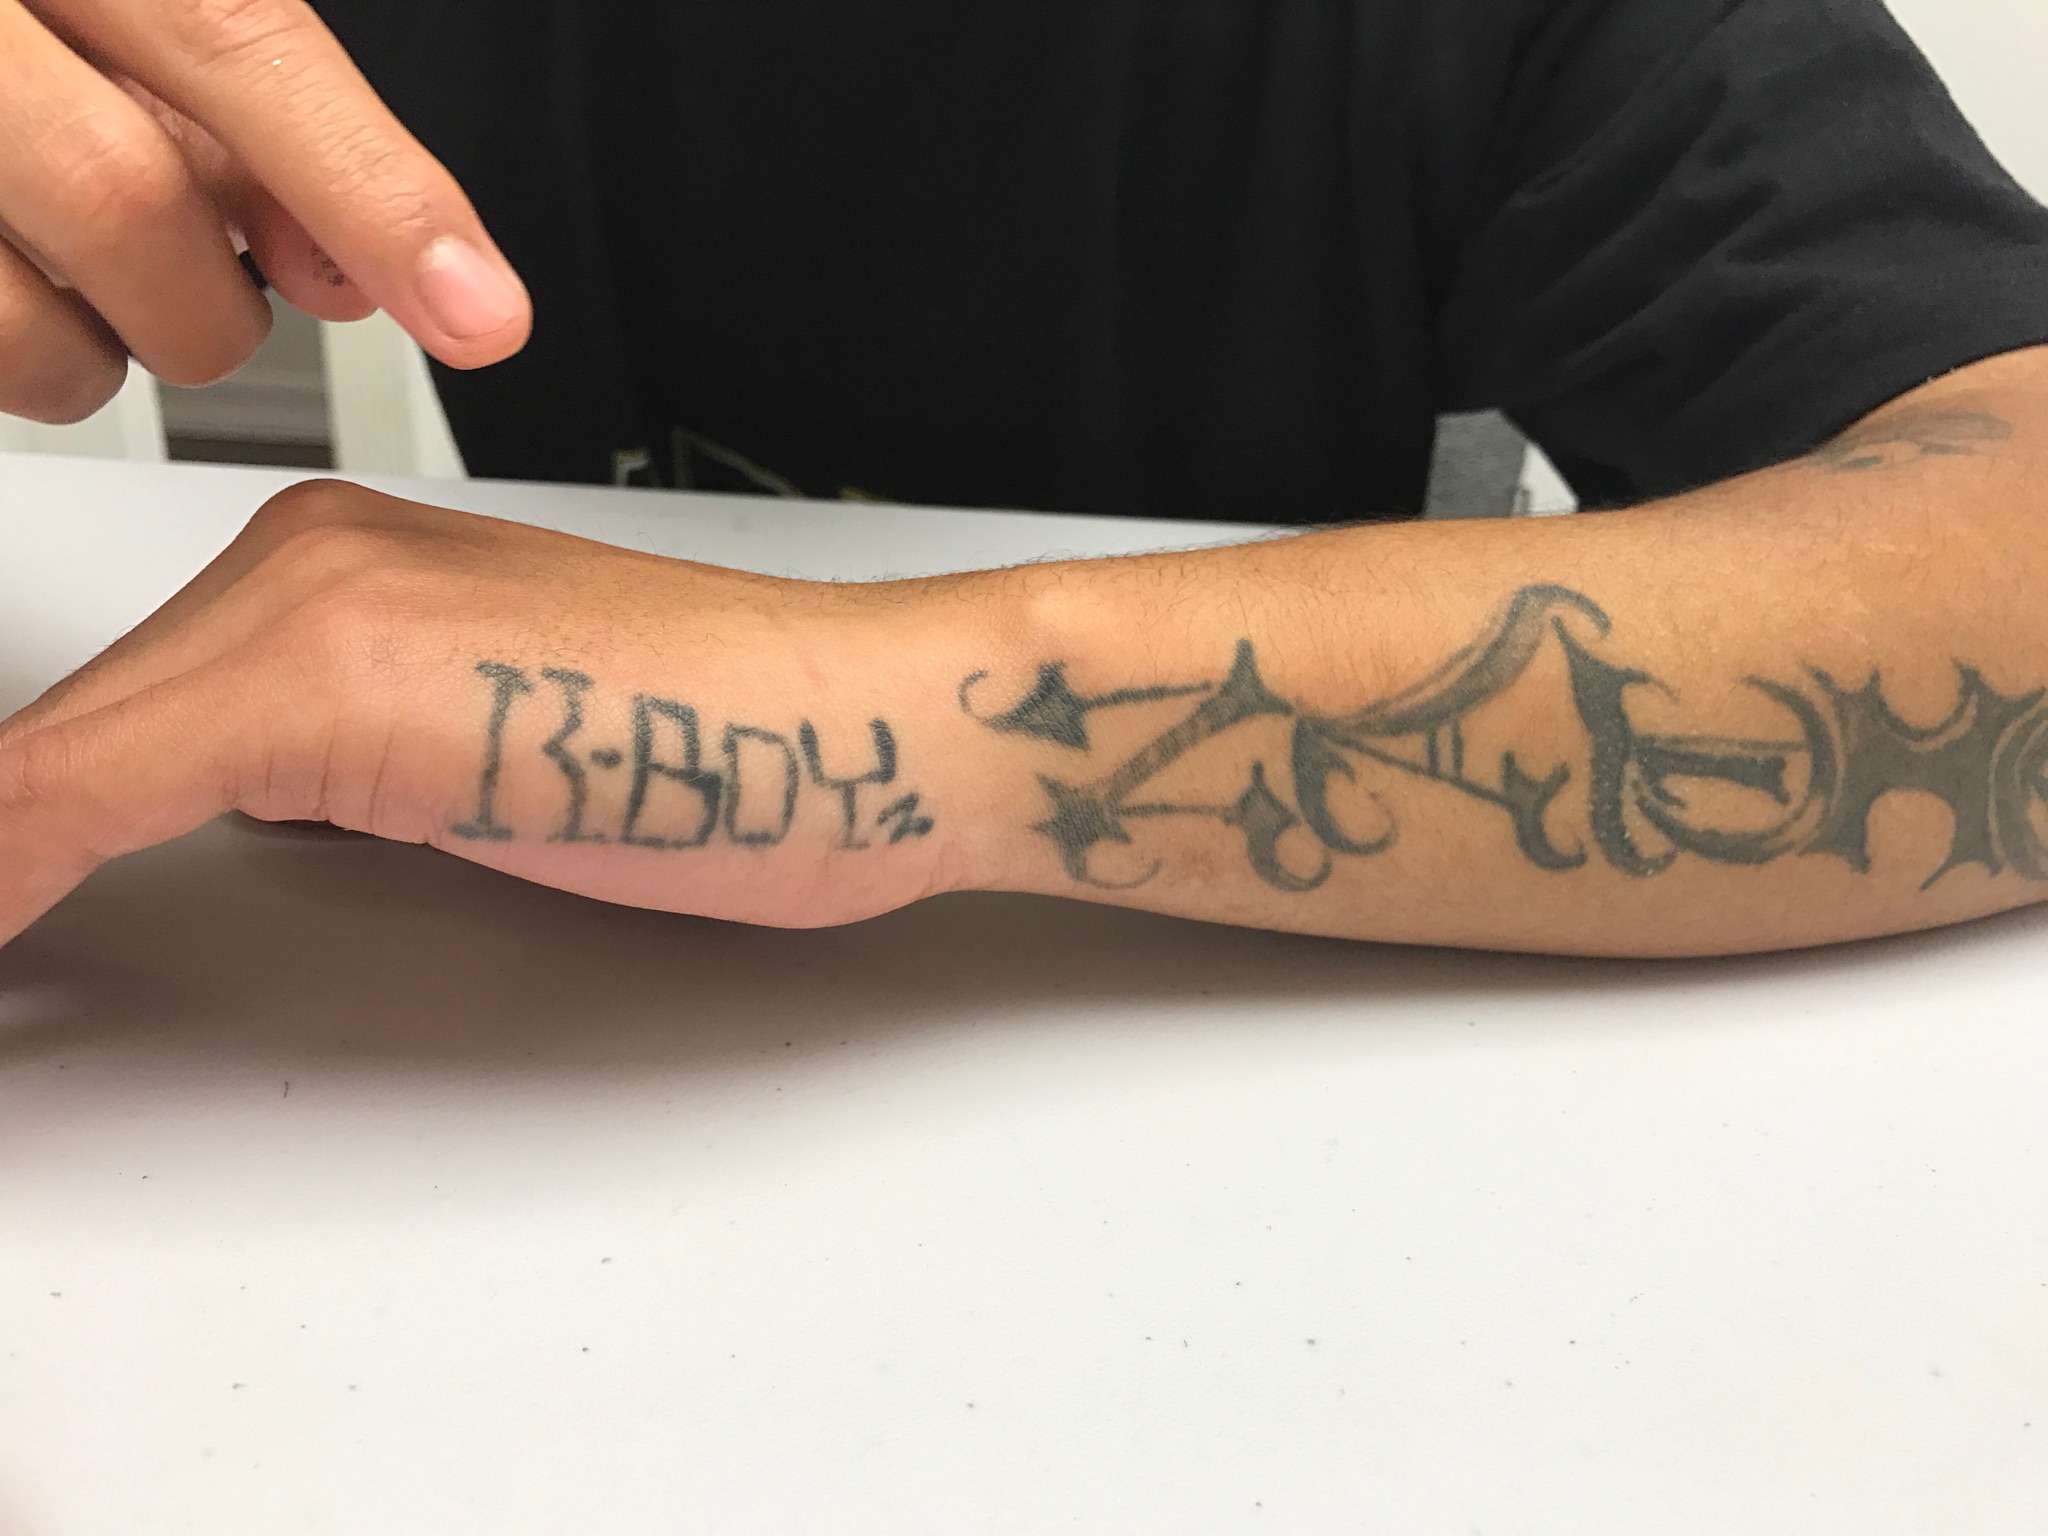 Evolve Tattoo Removal | San Diego's Leader in Laser Tattoo Removal